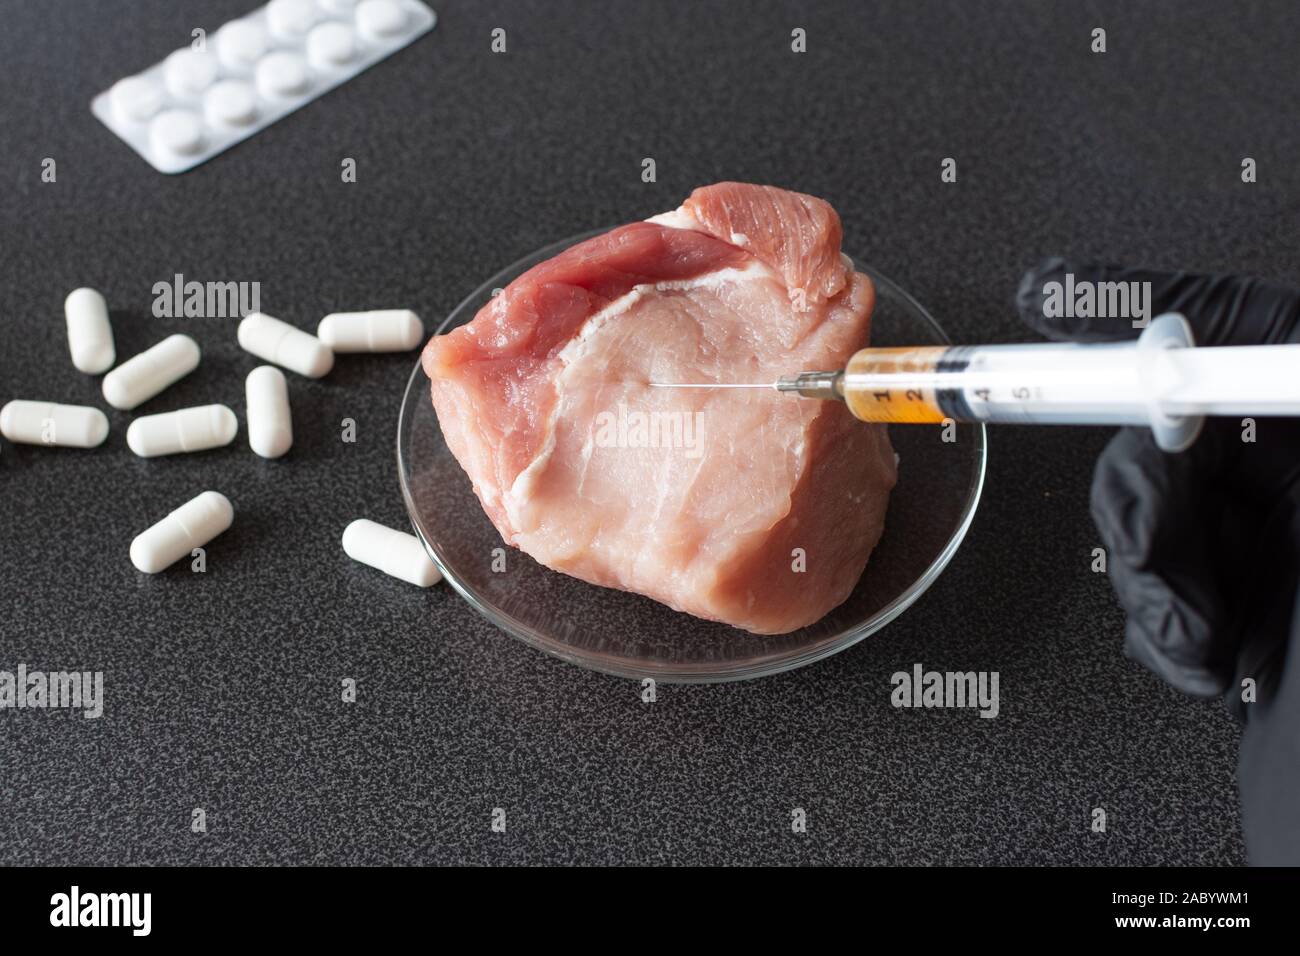 Researcher injecting GMO a slice of pork meat. Genetically modified organism, harmful for peples health. Meat with antibiotics concept. Stock Photo